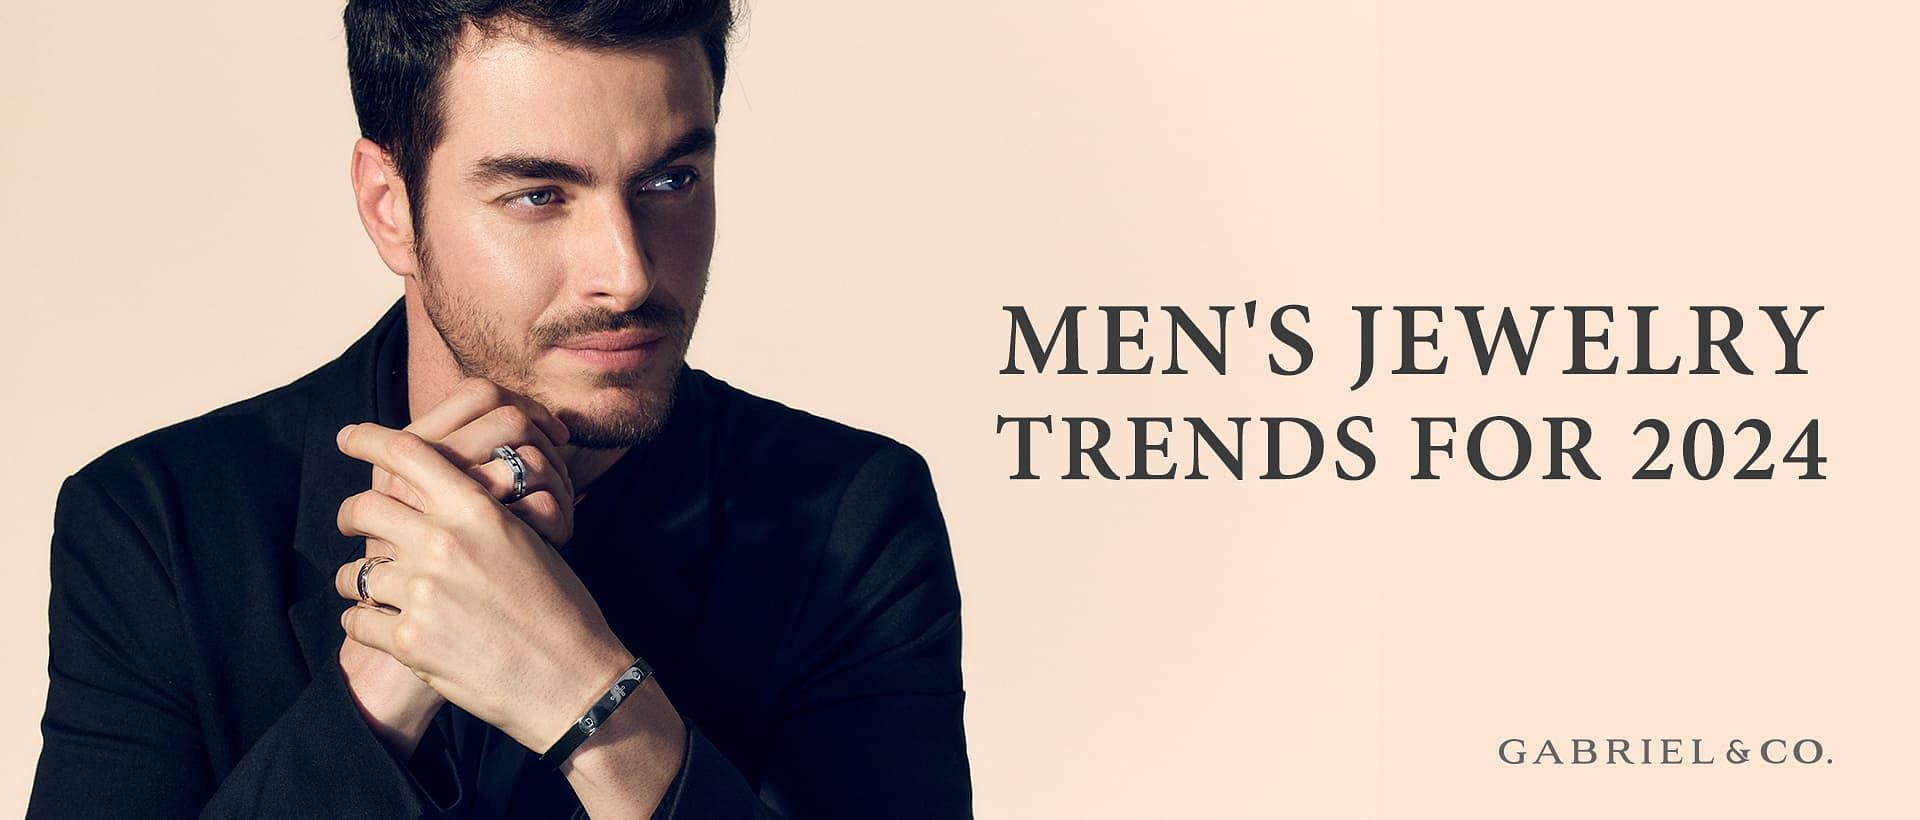 239. Men’s Jewelry Trends That Will Reign Supreme In 2024 Fe 